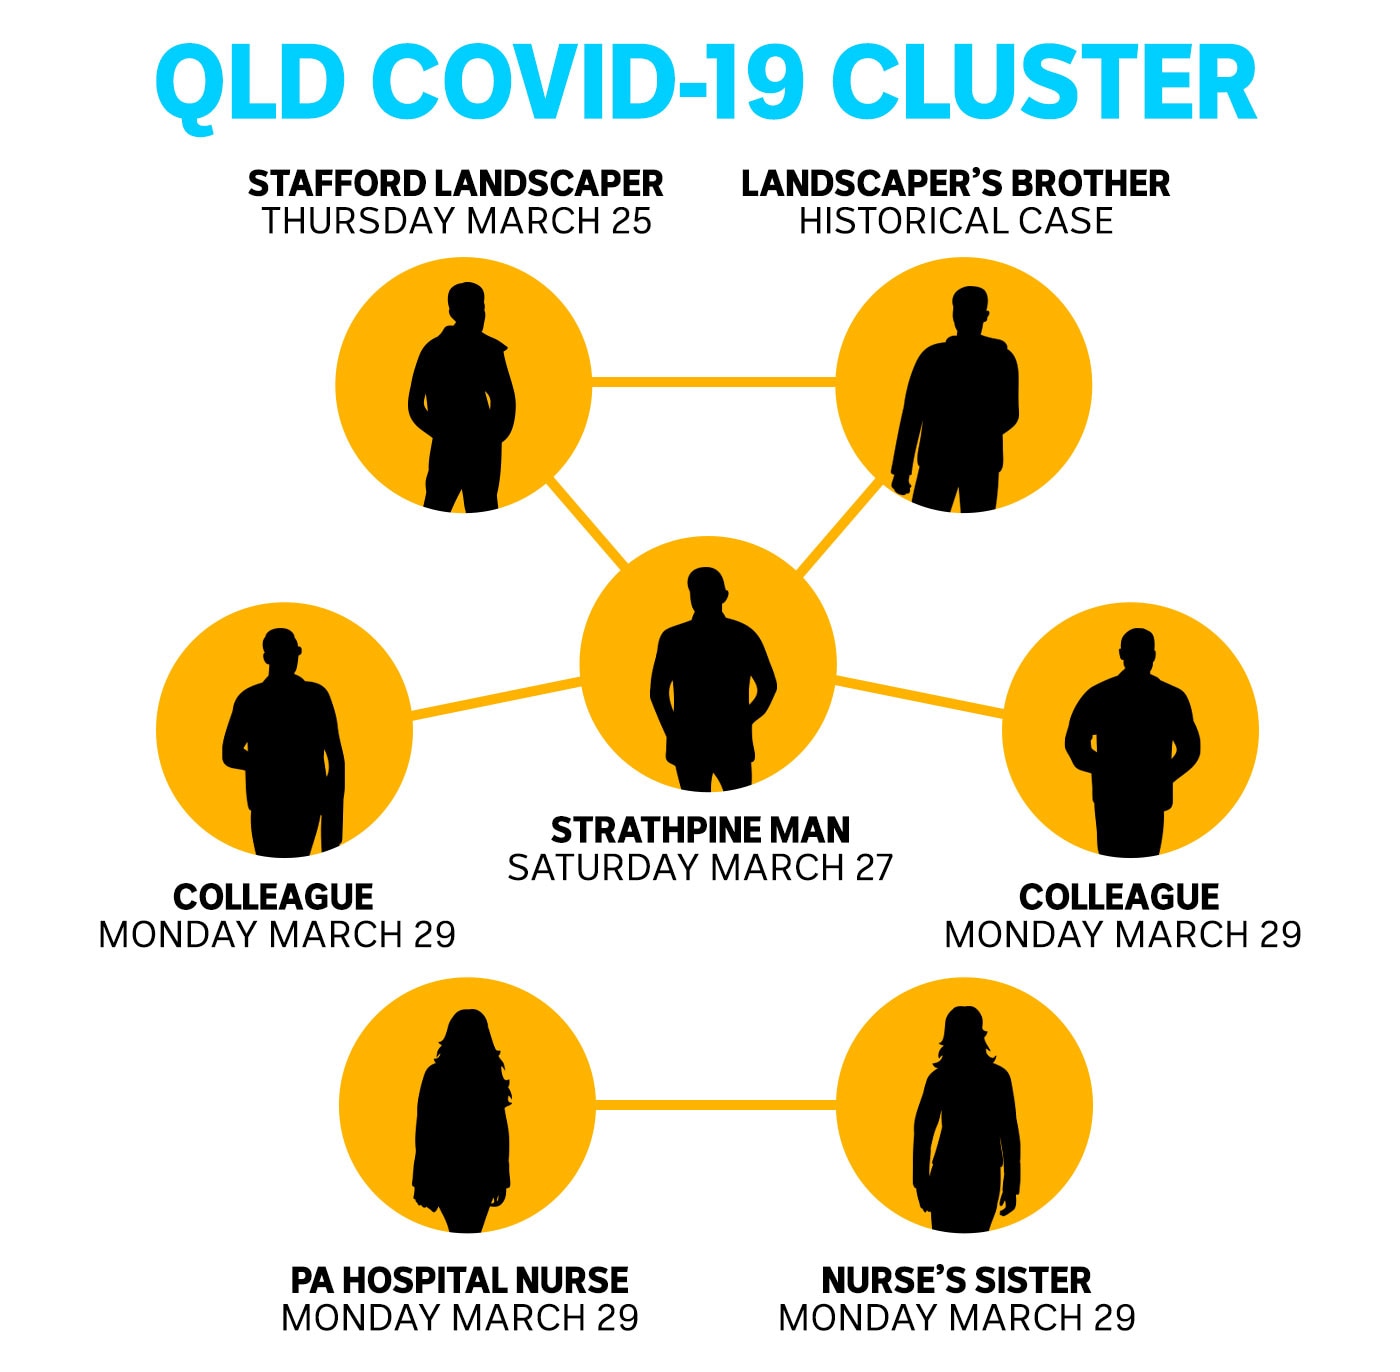 A graphic showing how COVID-19 cases are linked